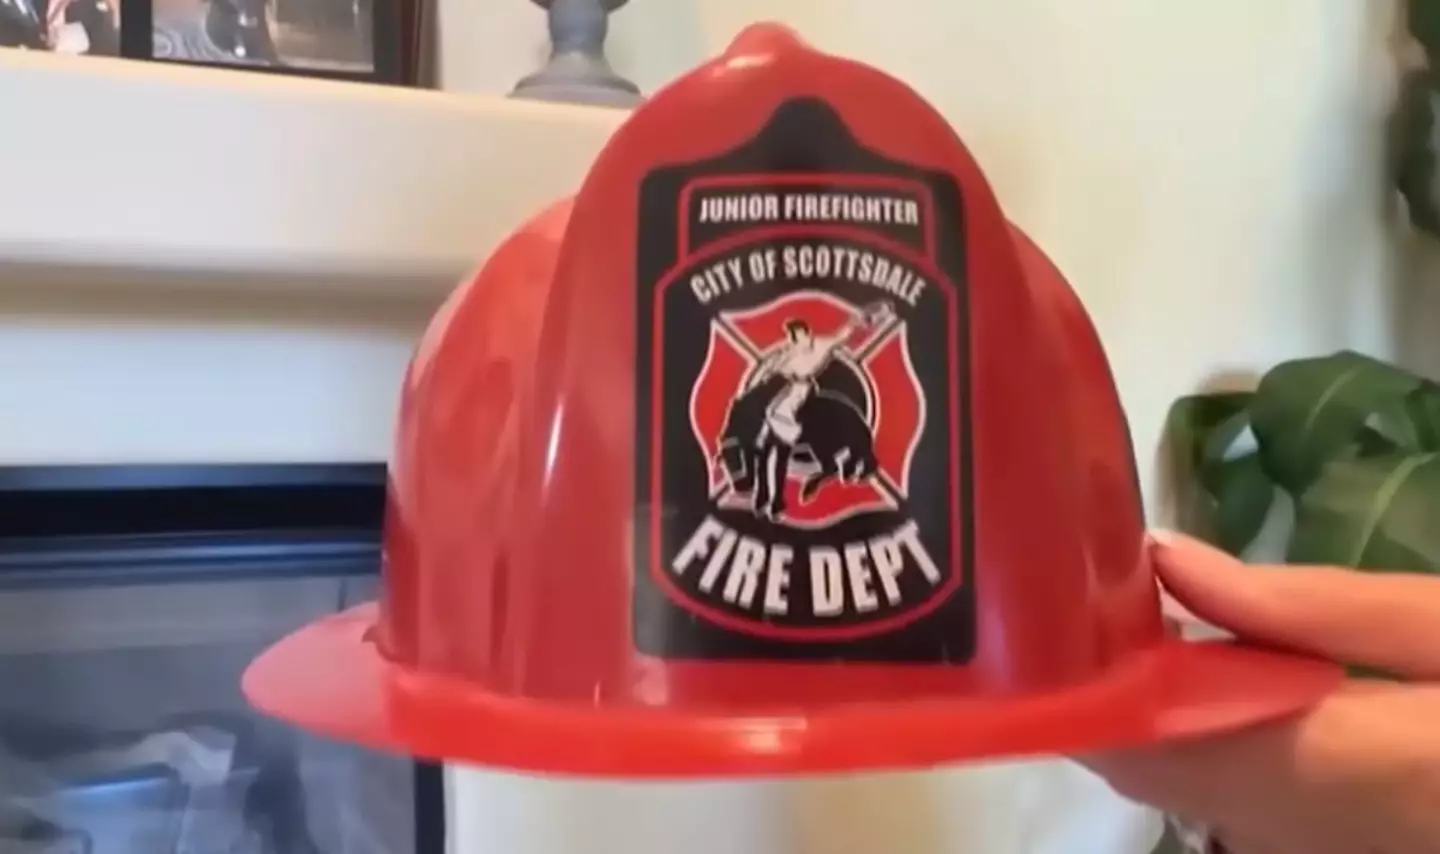 The trapped child was given a firefighter's hat to mark her bravery. (On Your Side/Arizona's Family/3TV/CBS 5)